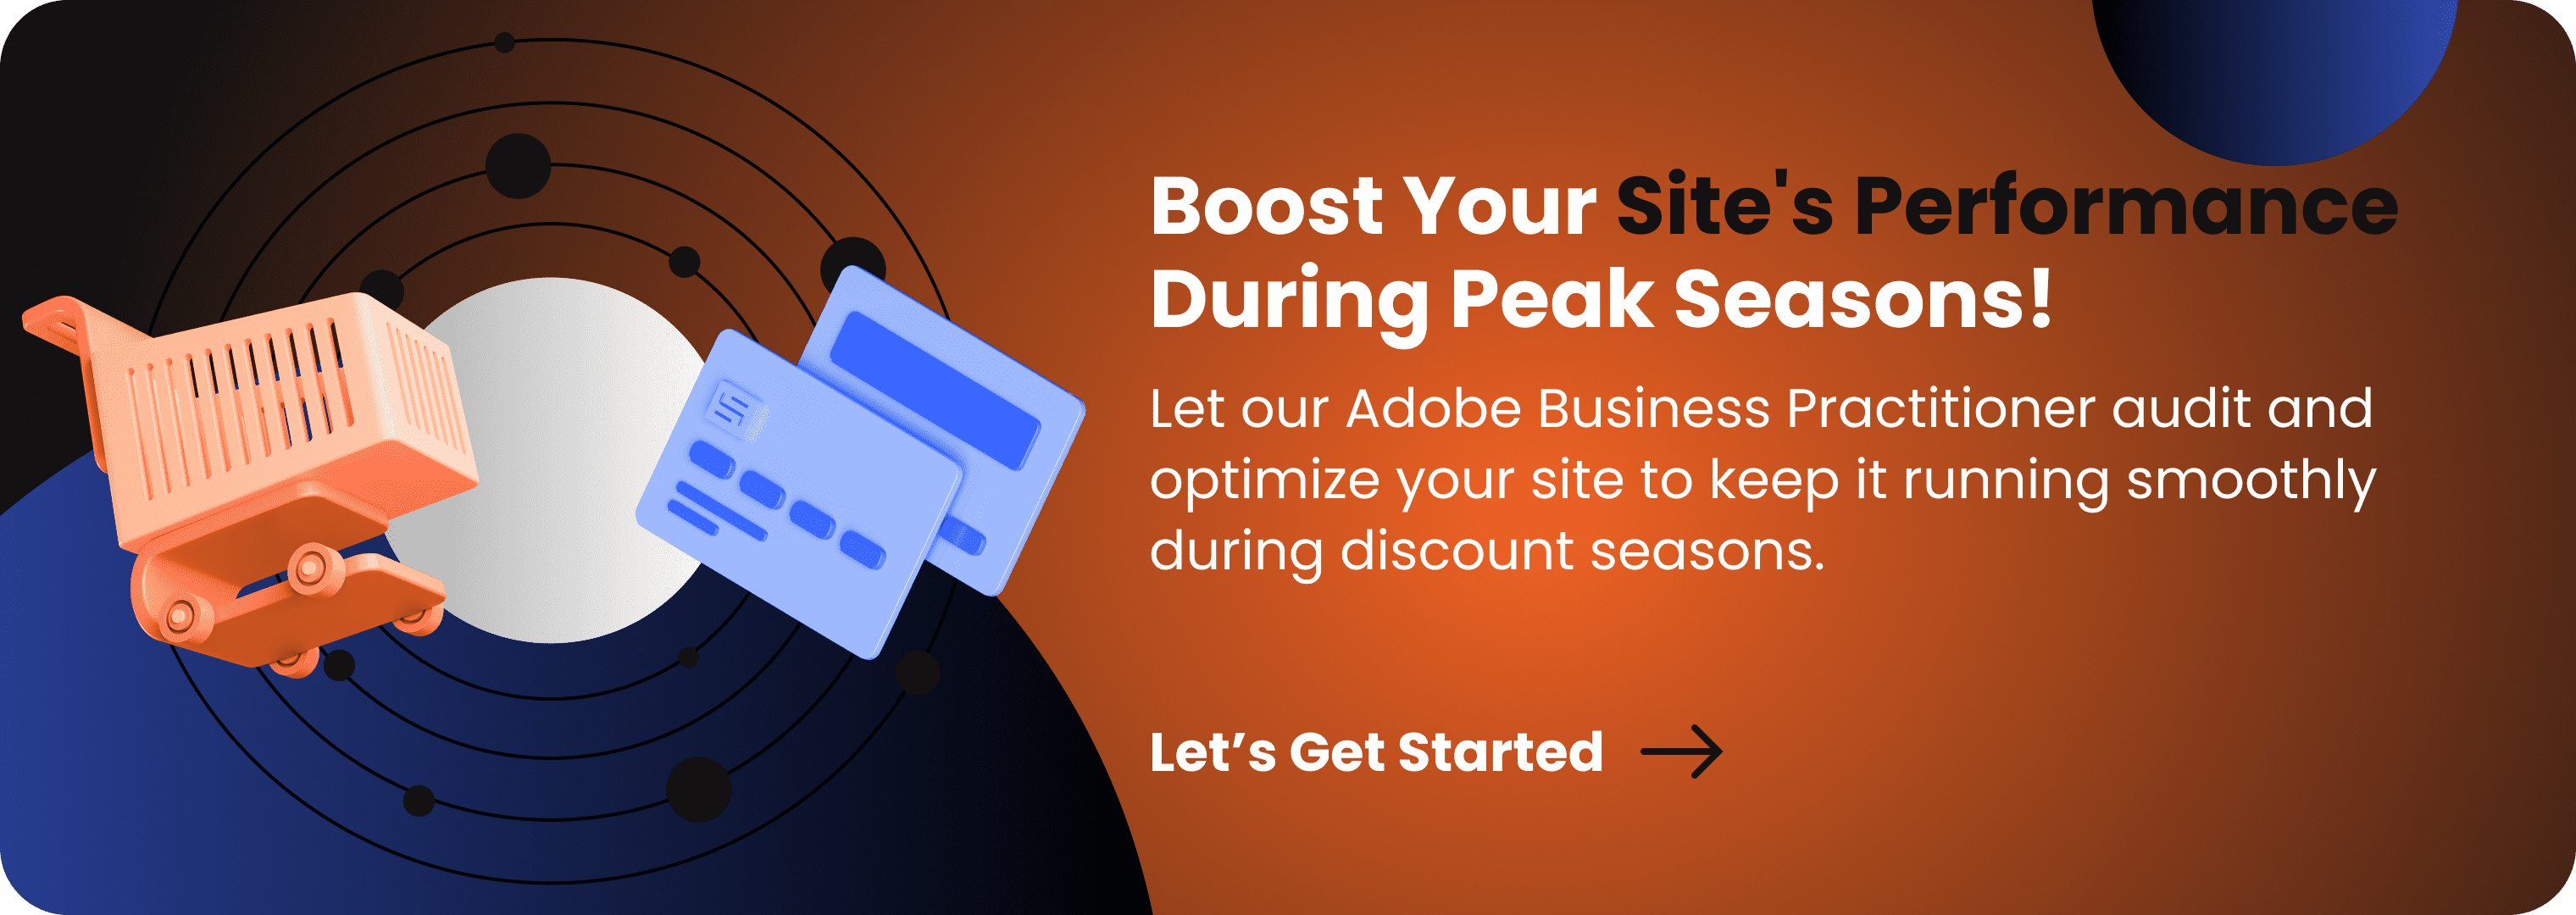 Performance - Boost Your Site's Performance During Peak Seasons!